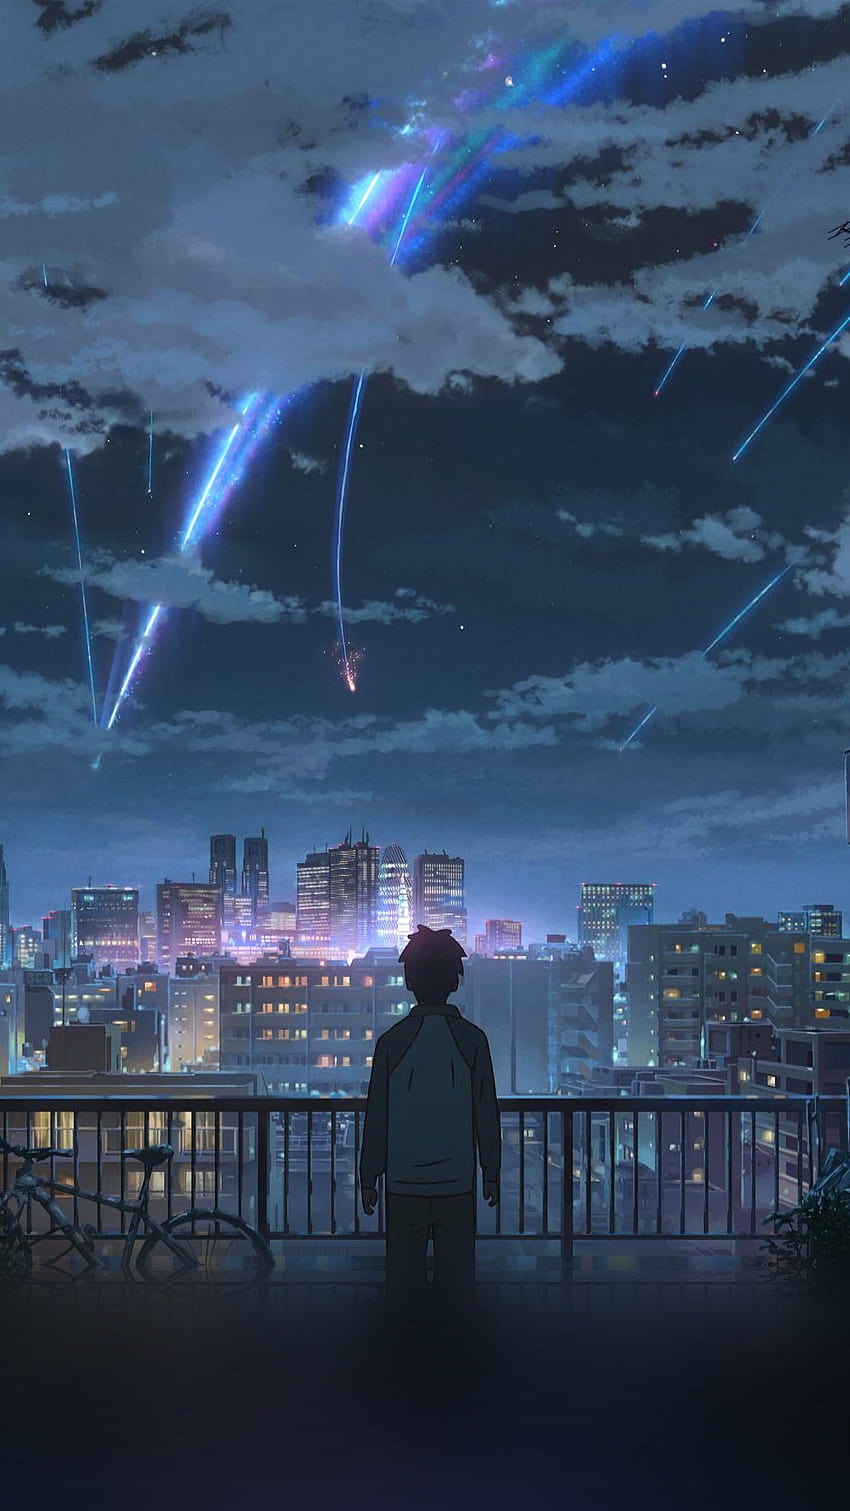 Yourname Night Anime Sky Illustration Art Android wallpaper ponsel HD